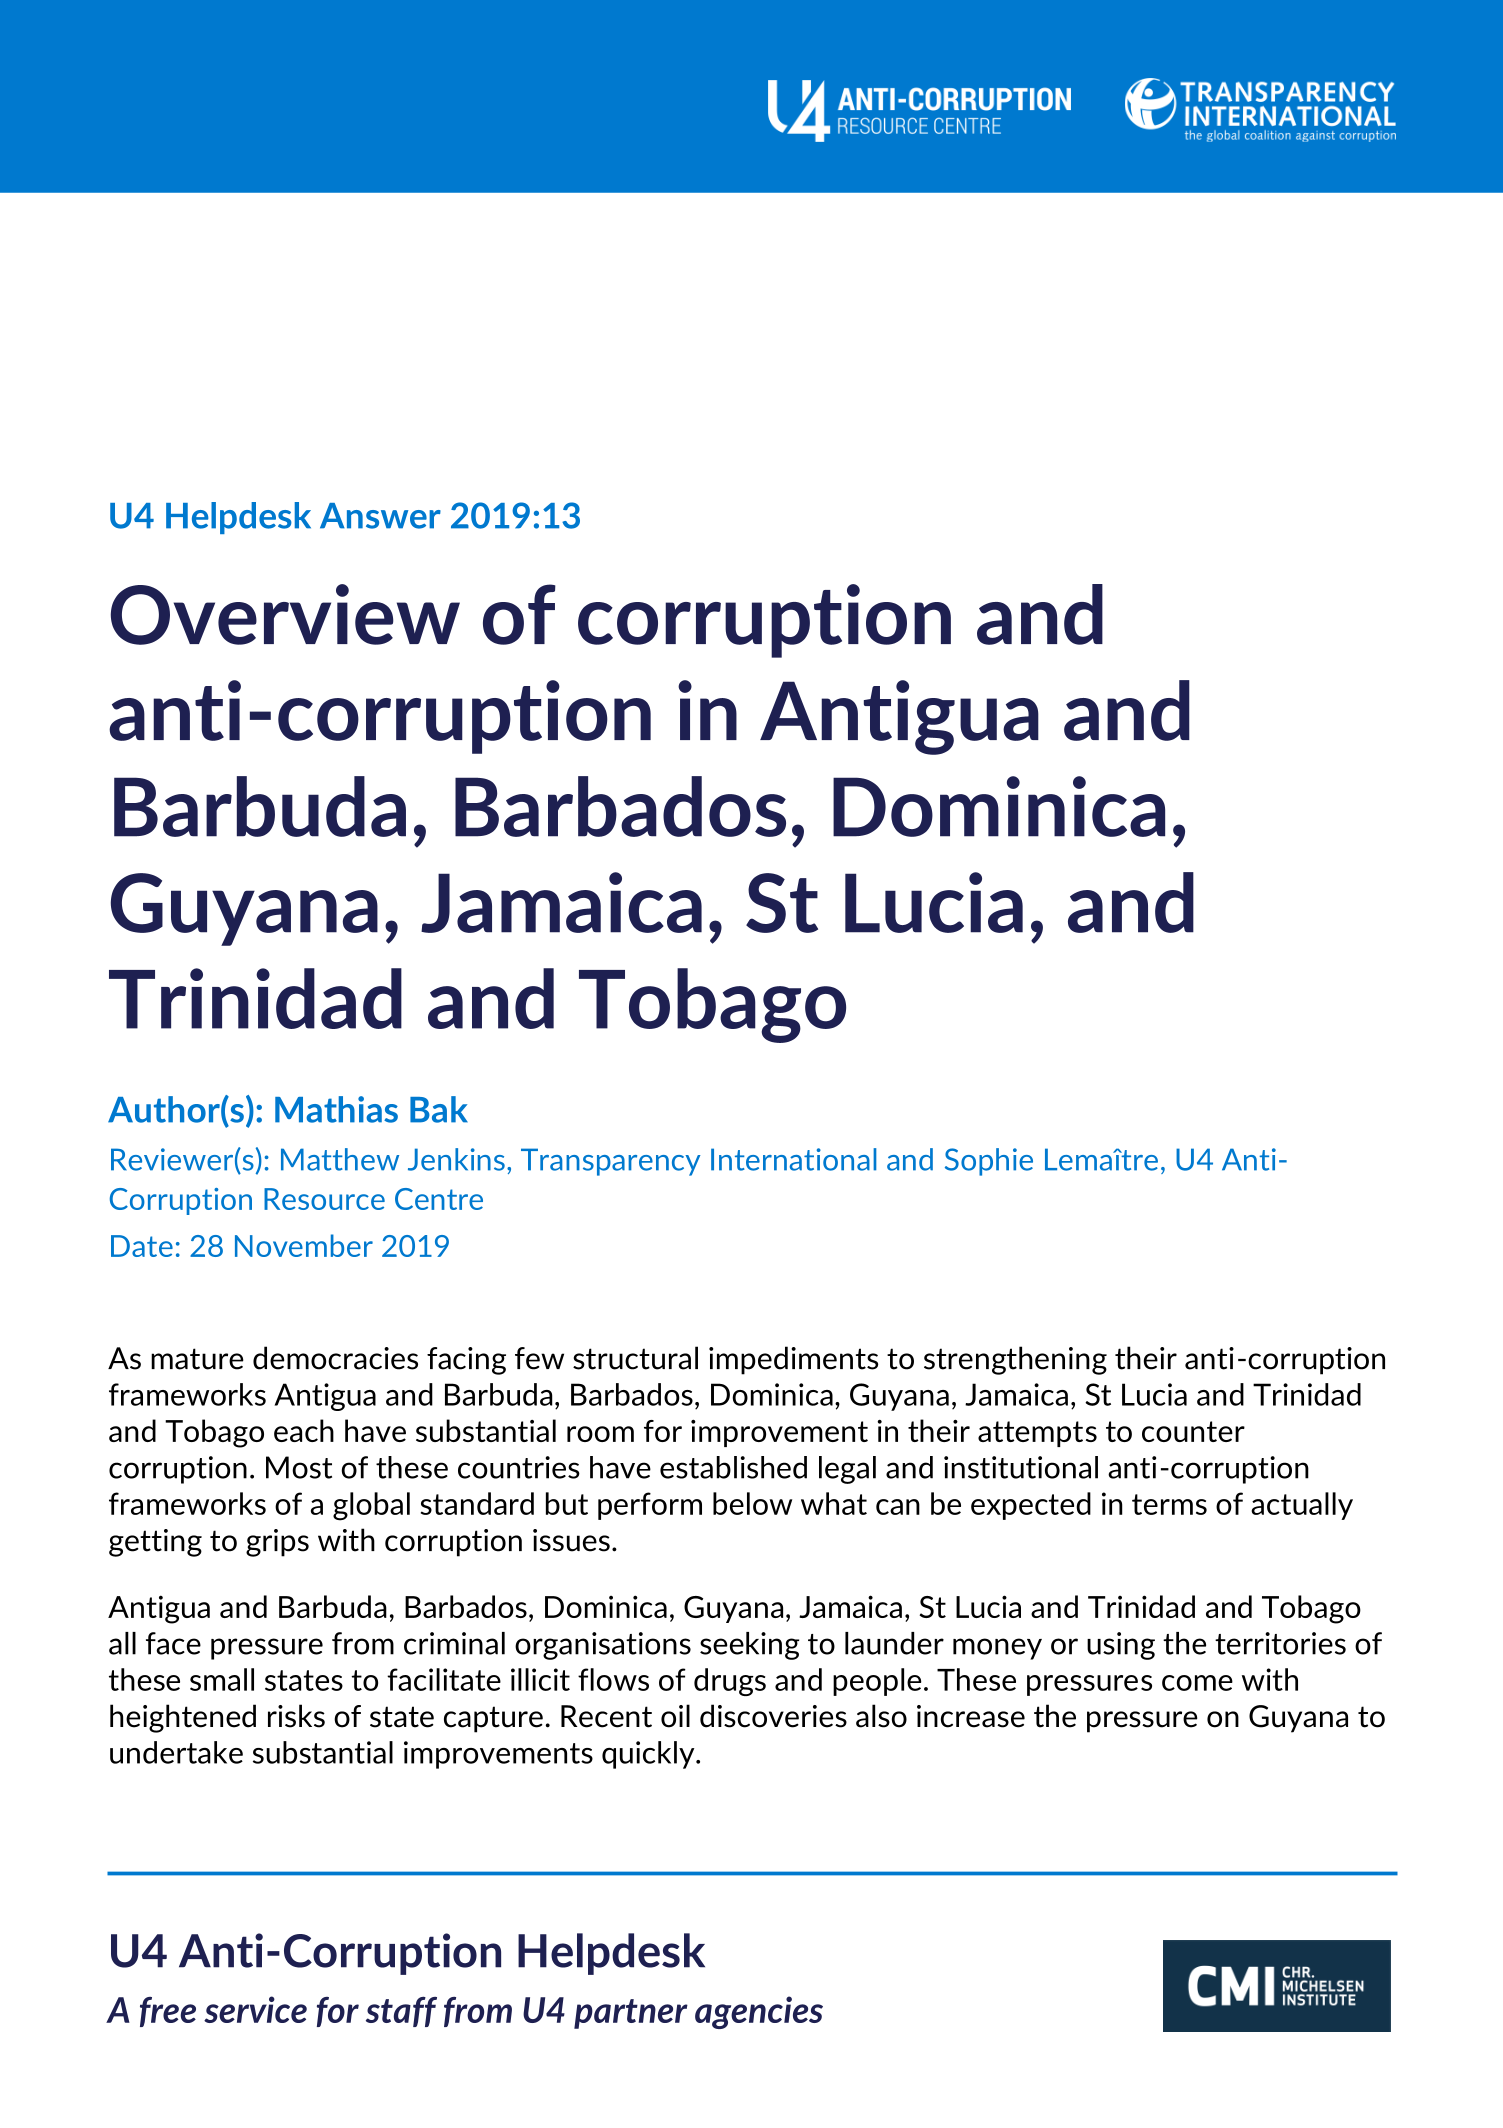 Overview of corruption and anti-corruption in Antigua and Barbuda, Barbados, Dominica, Guyana, Jamaica, St Lucia, and Trinidad and Tobago